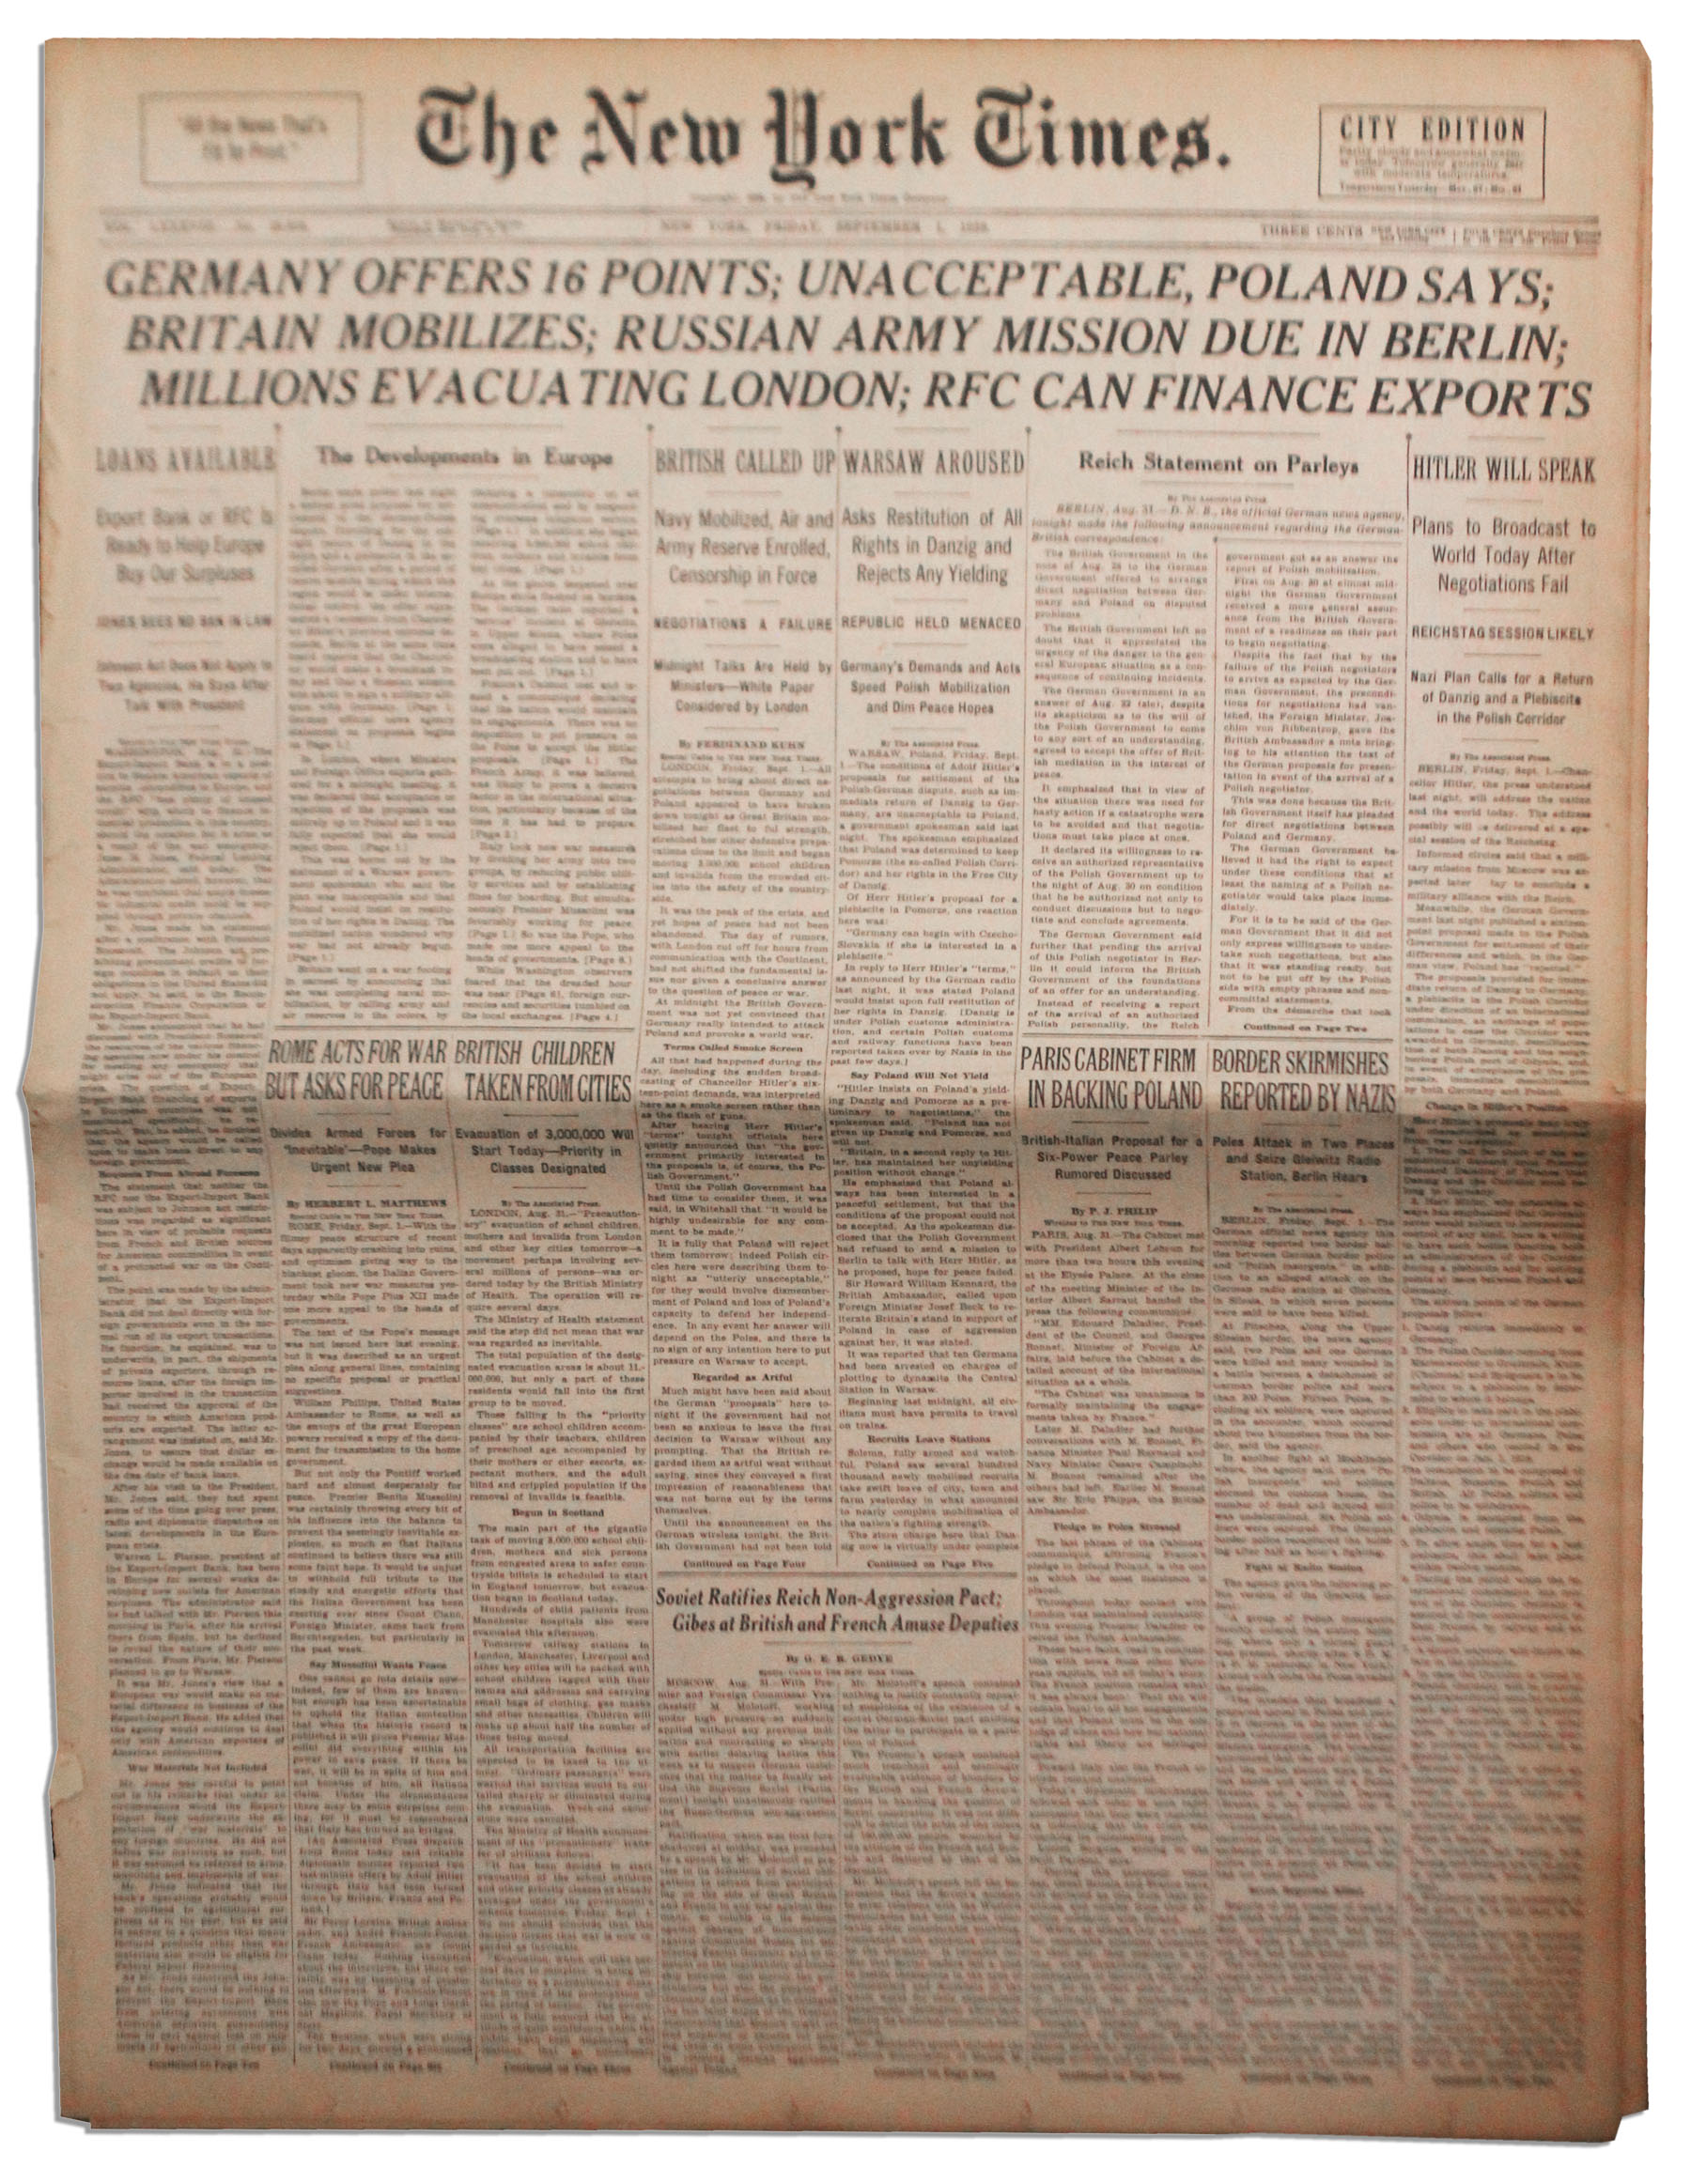 Lot Detail The New York Times From 1 September 1939 Millions Evacuating London